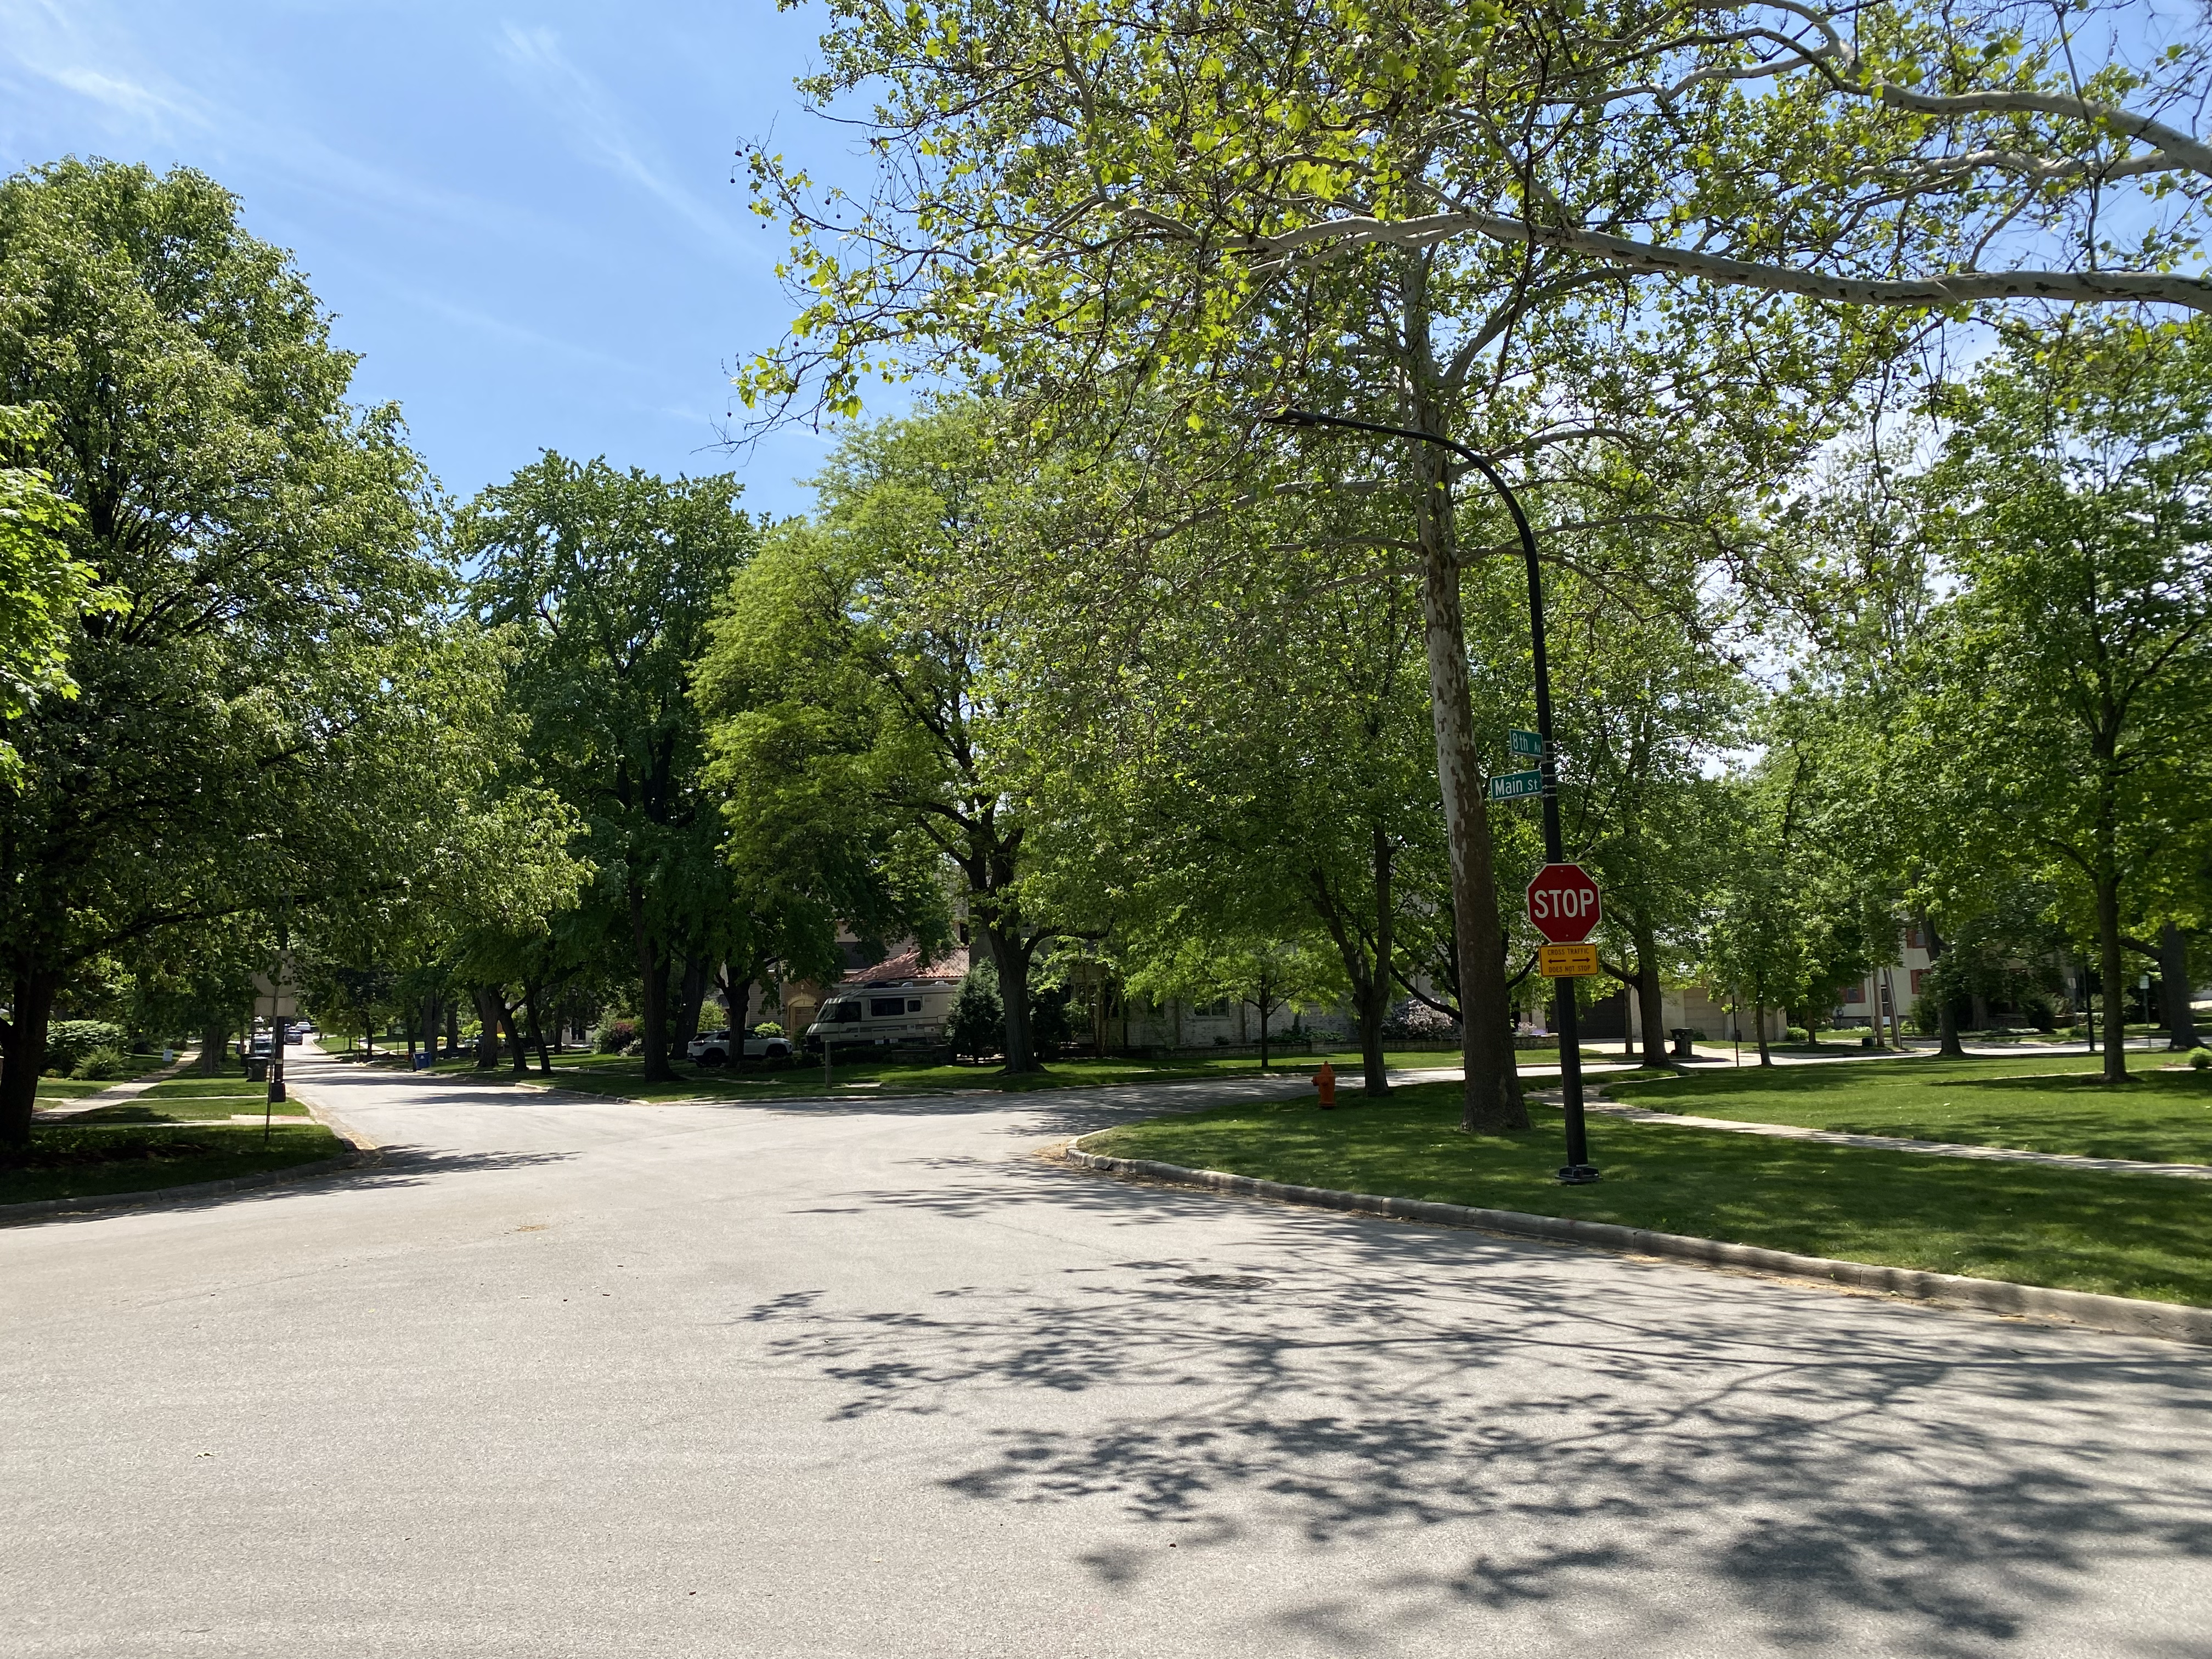 The Old Naperville neighborhood is located near Naperville North High School to the west and Kendal Park to the south. 